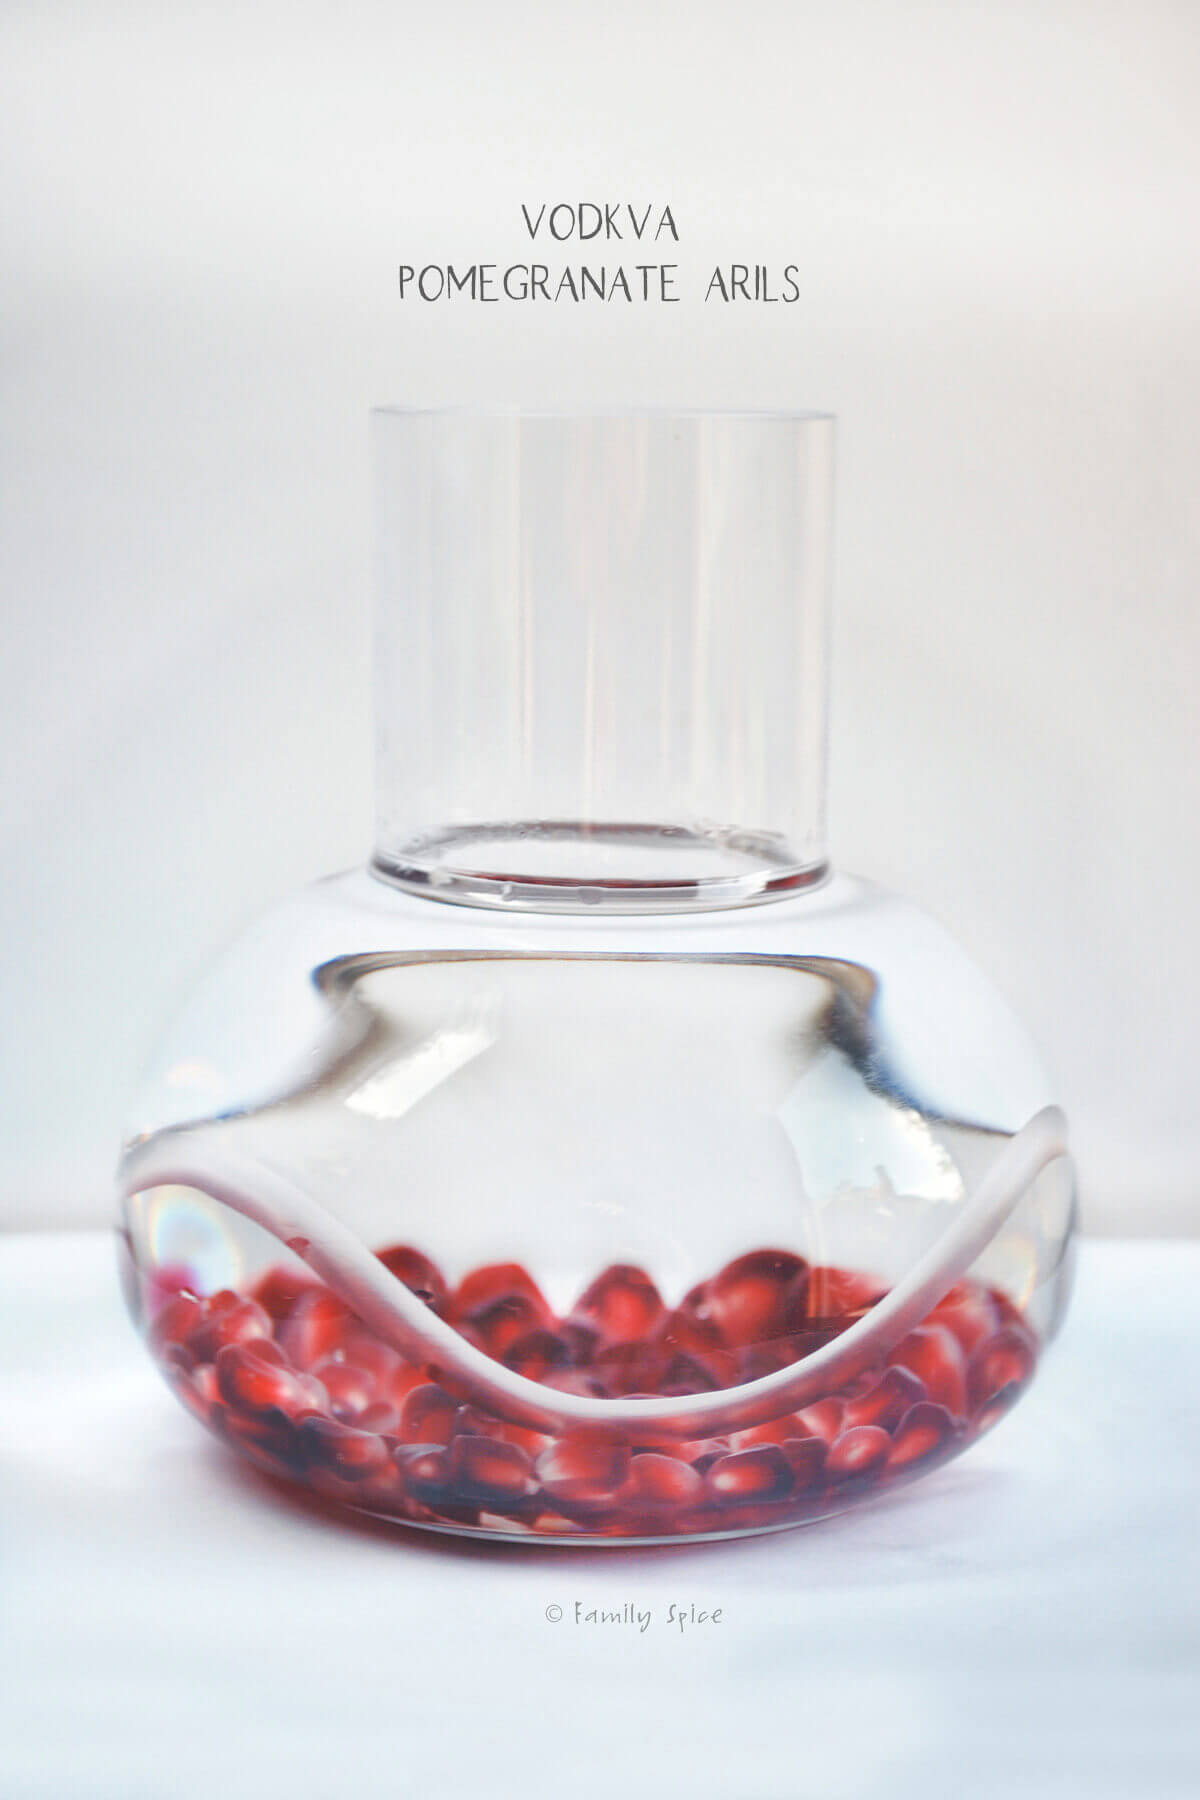 Side view of pomegranate arils in a bottle of vodka with ingredients listed